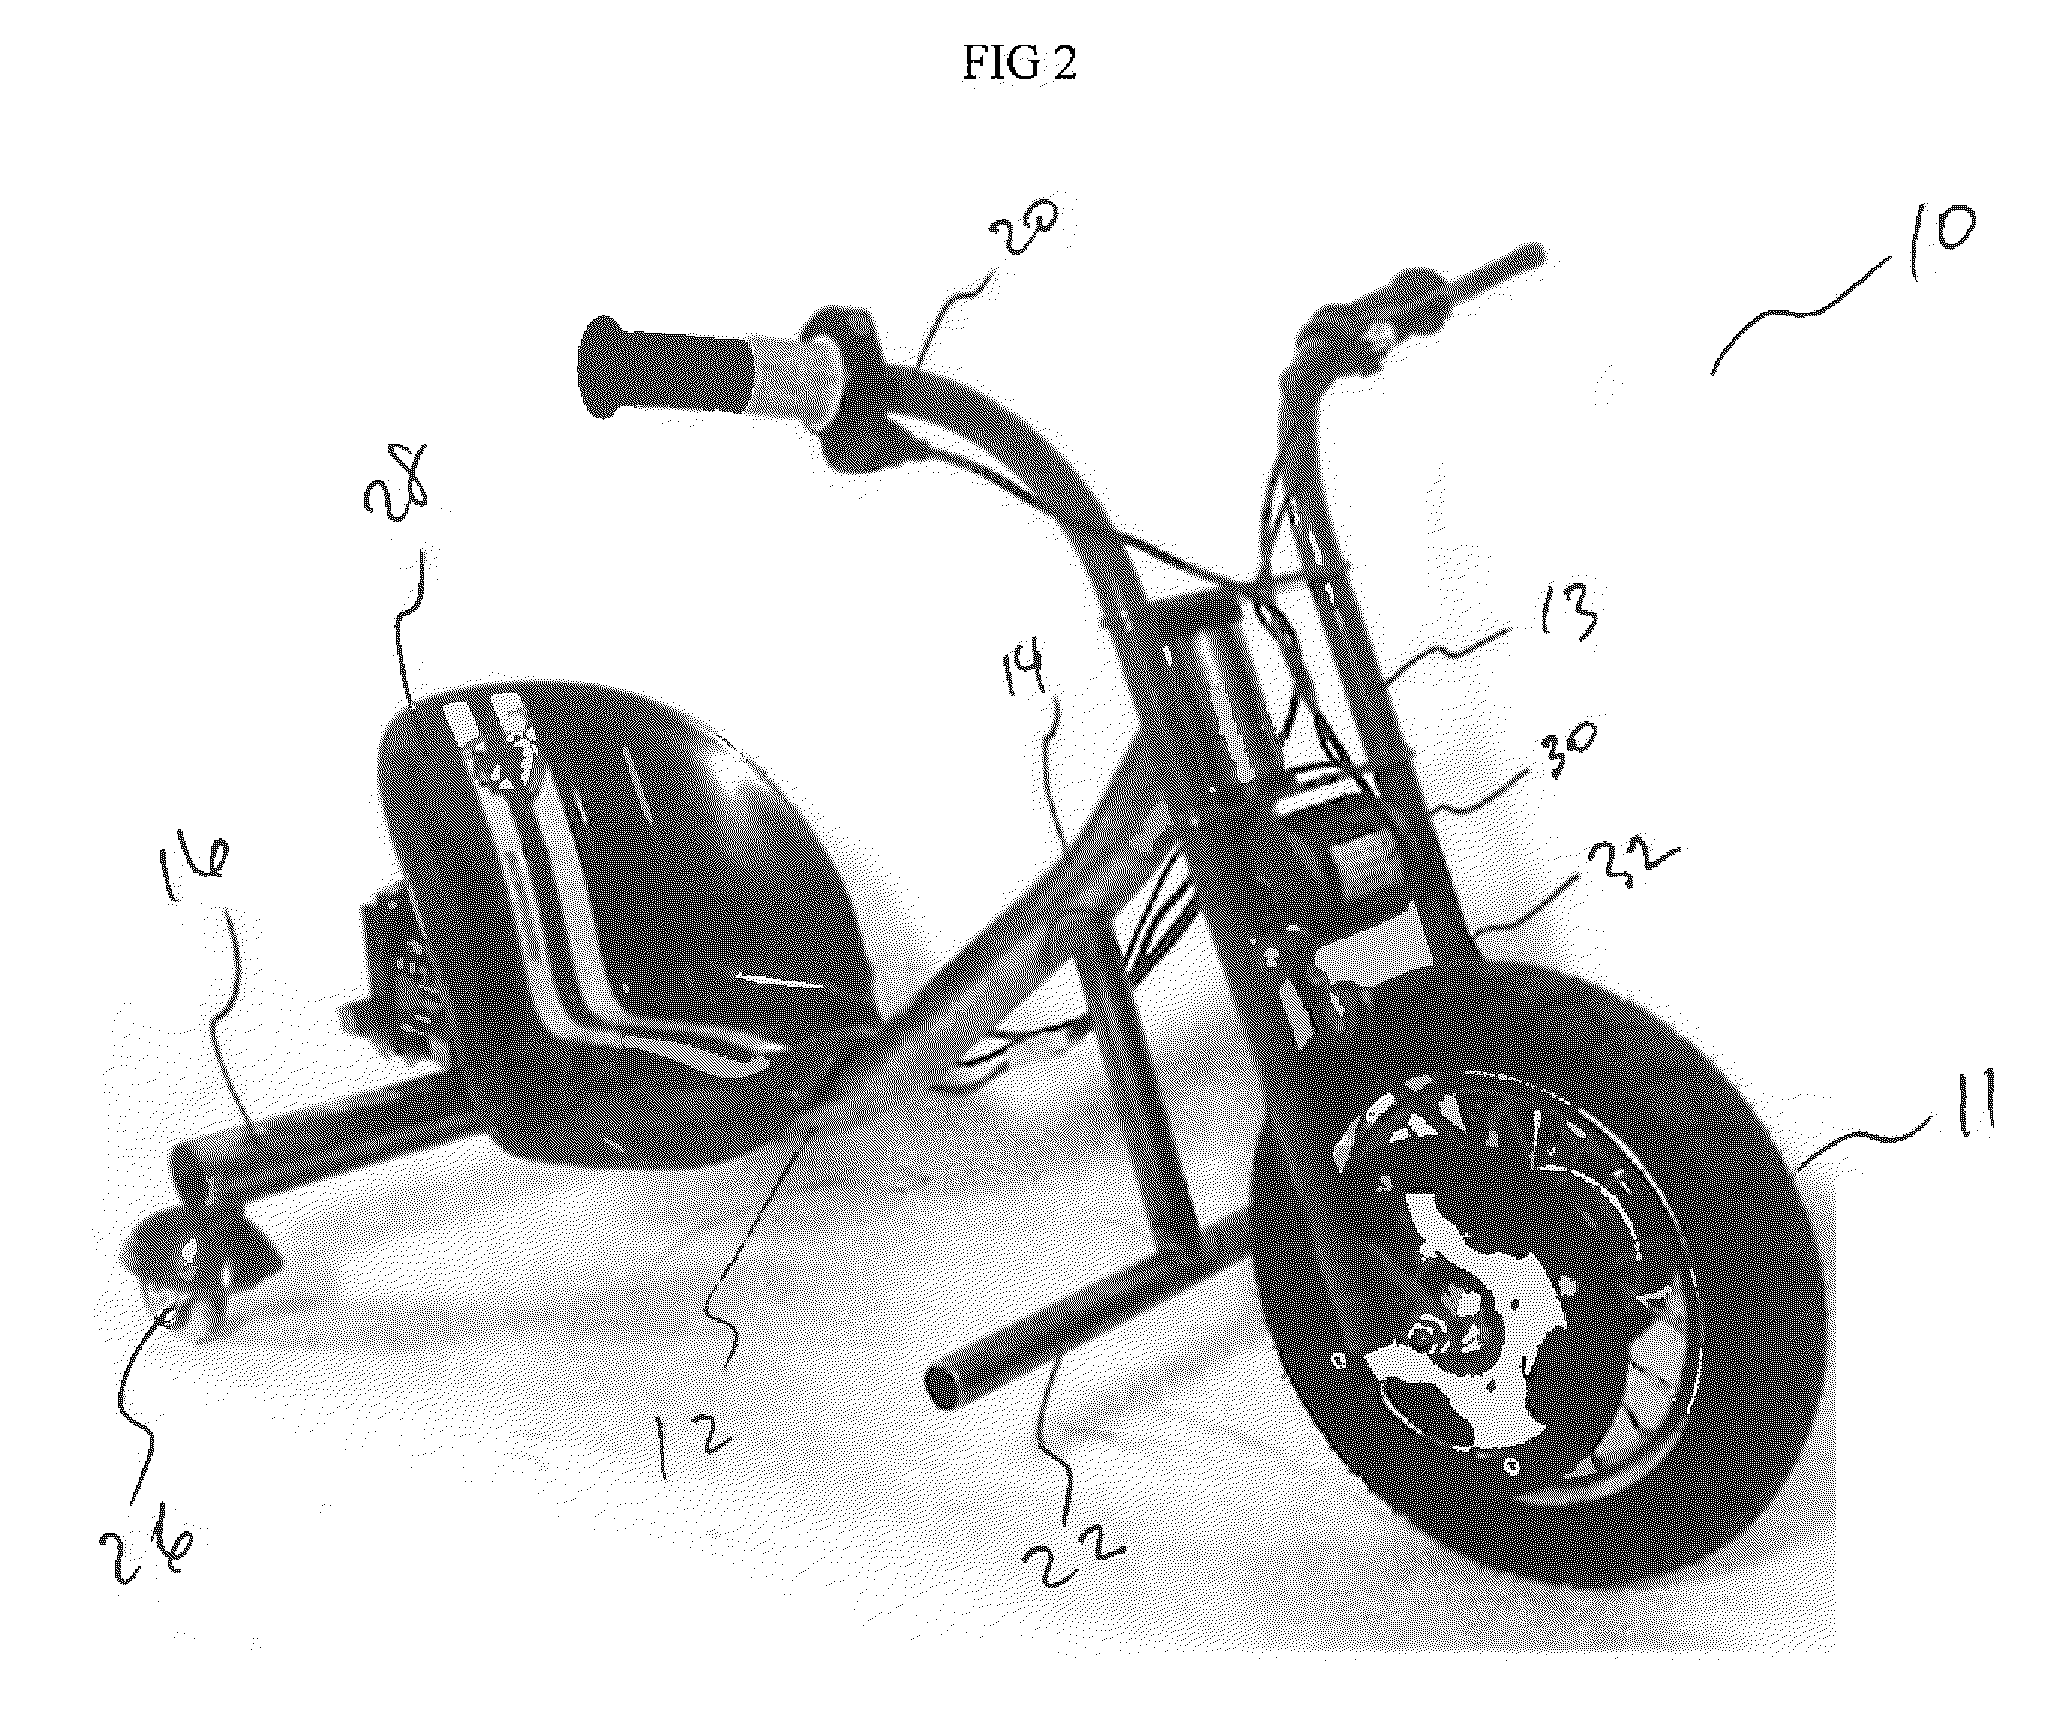 Powered personal mobility vehicle with rotating wheels